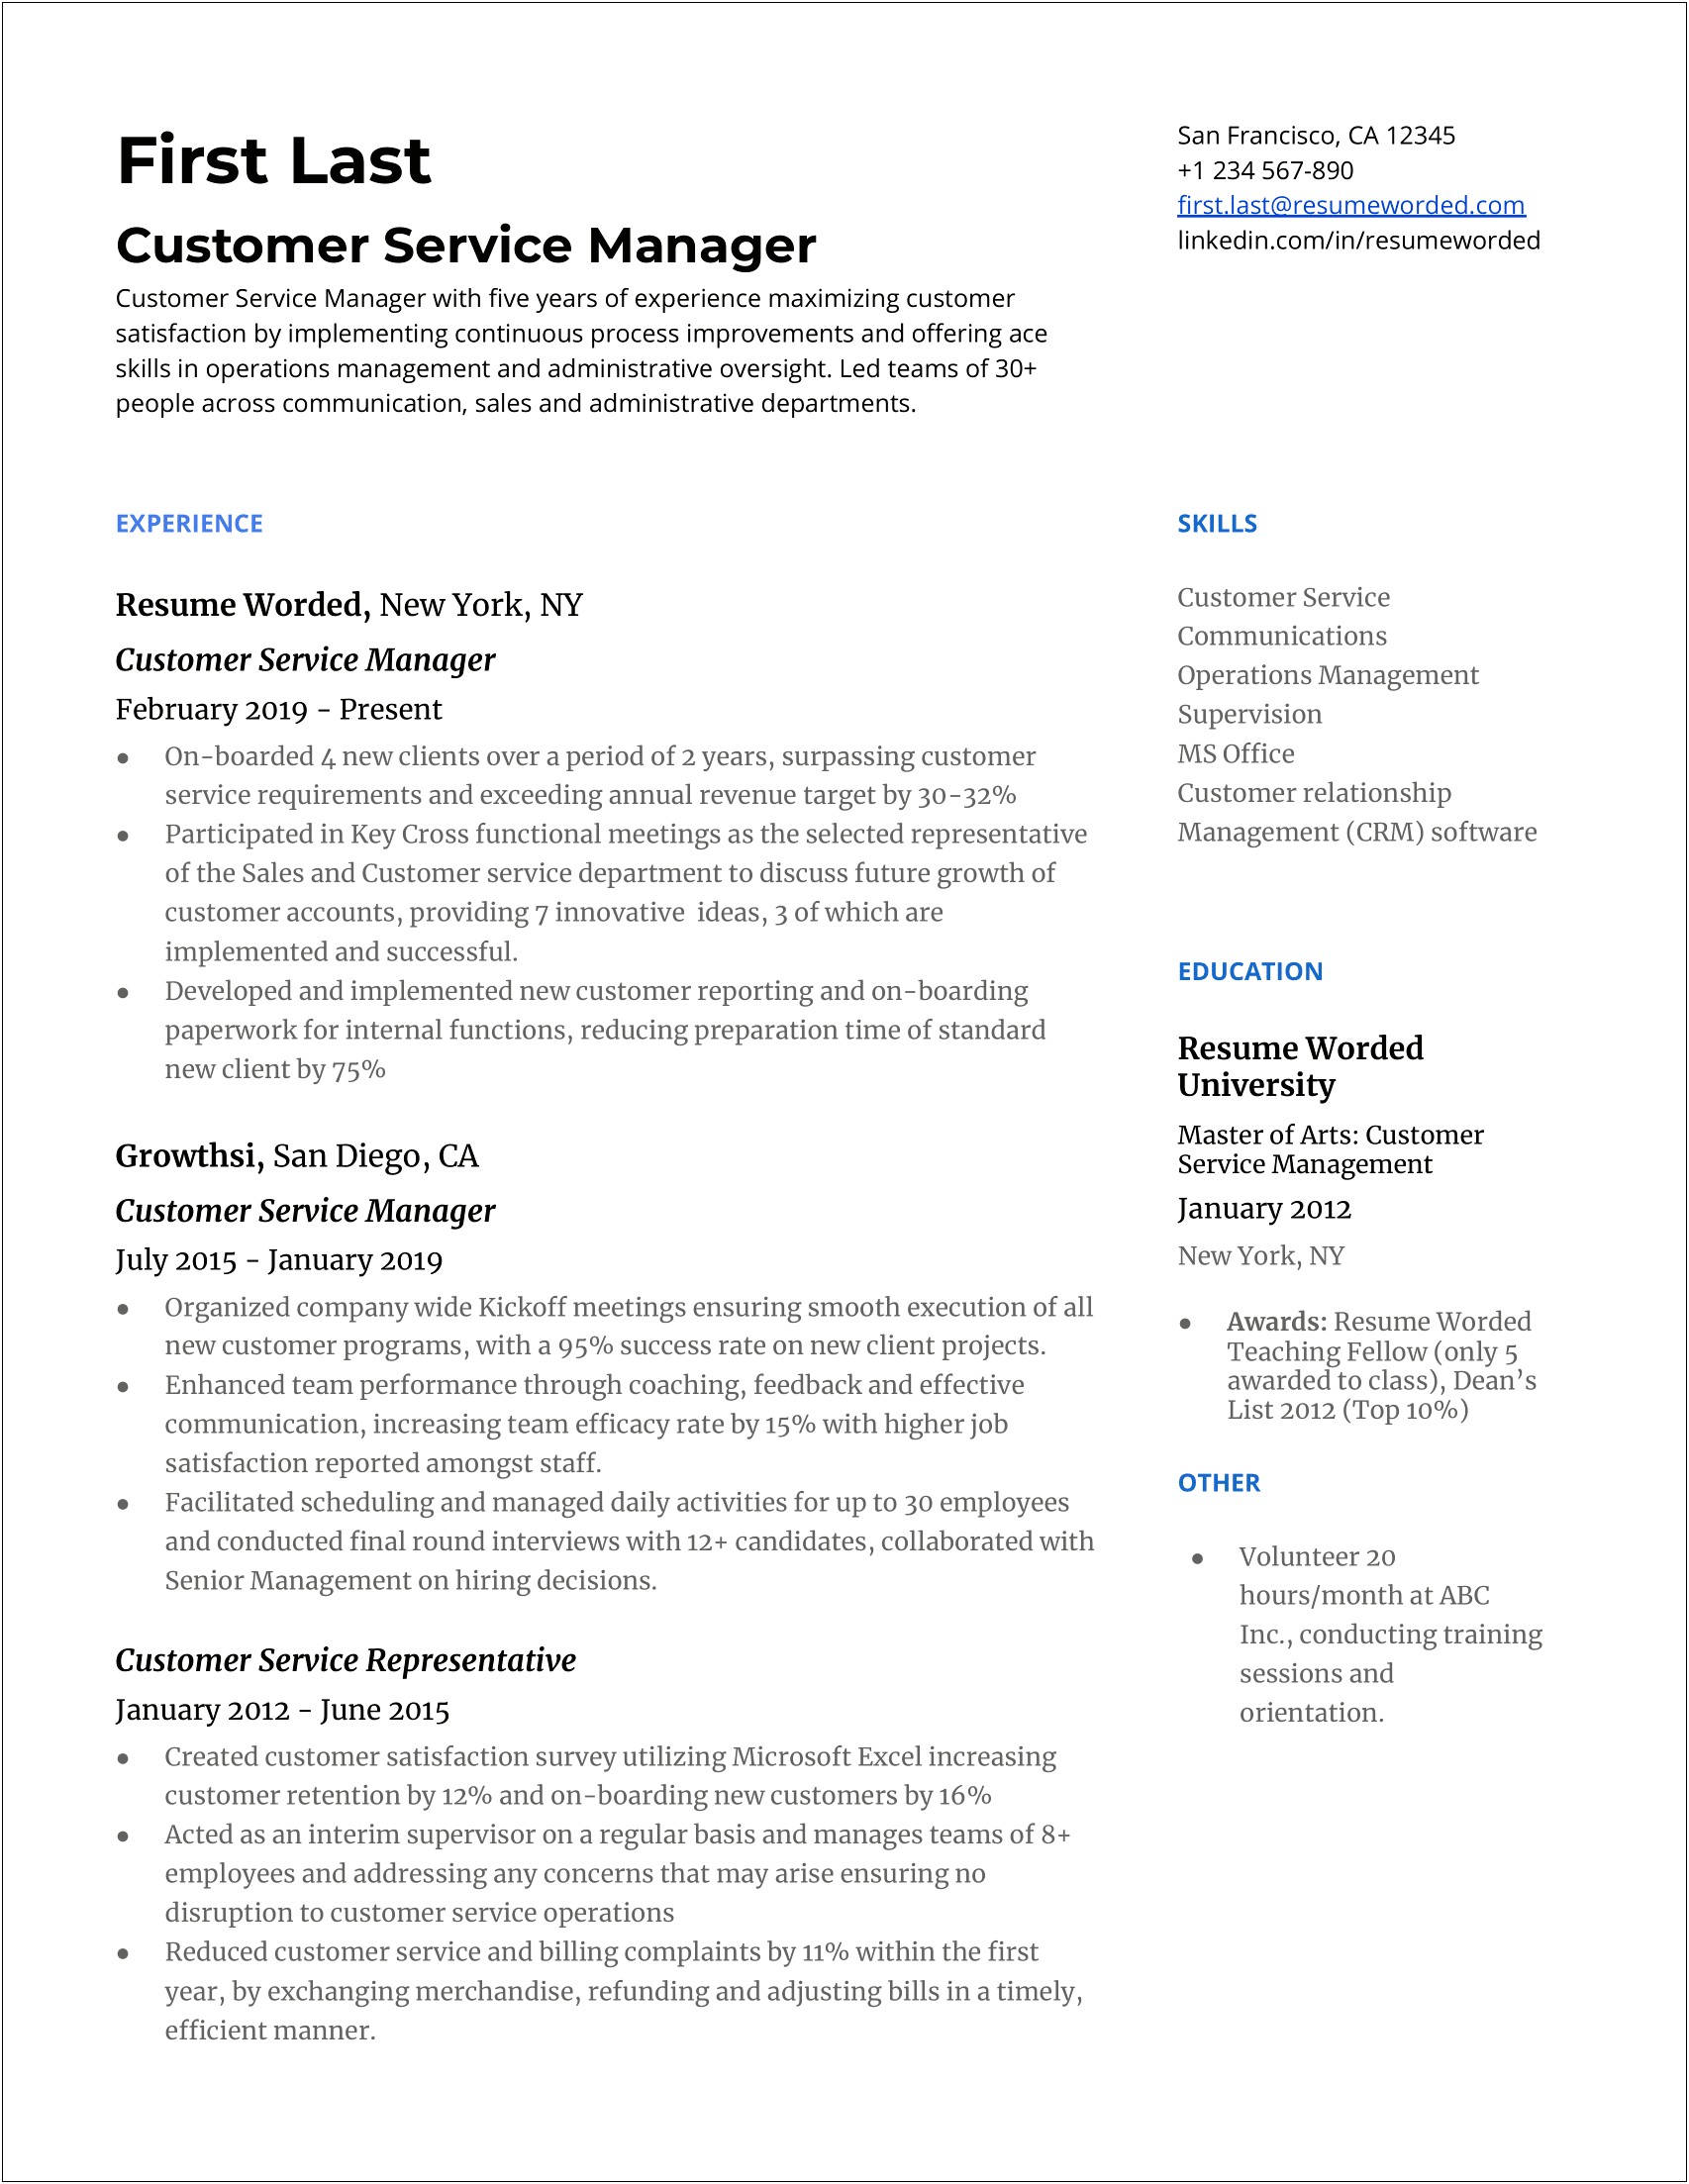 Resume Work Experience Examples For Customer Service